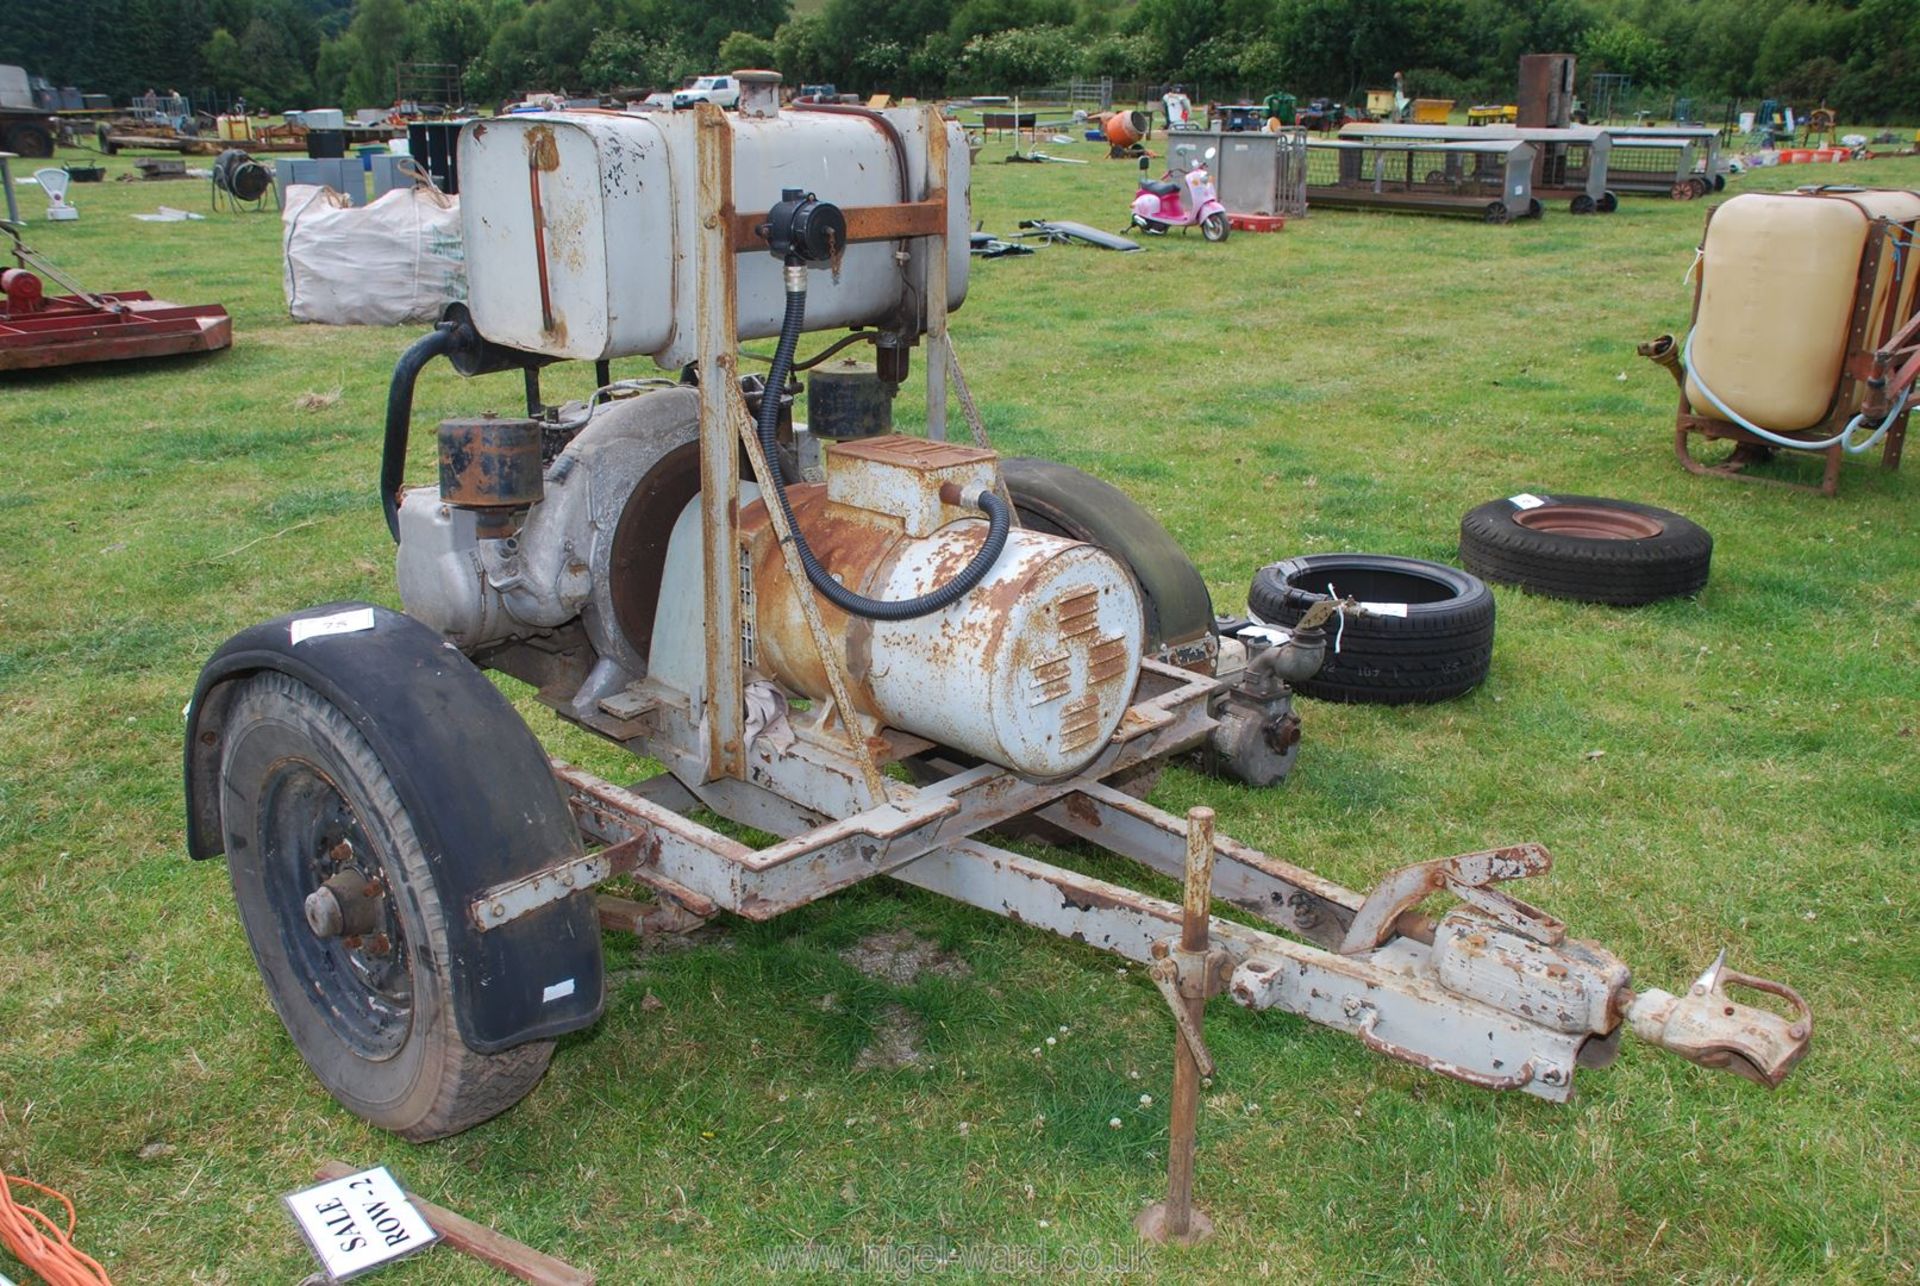 A trailer-mounted Enfield twin-cylinder horizontally opposed diesel engined 15 kva generator